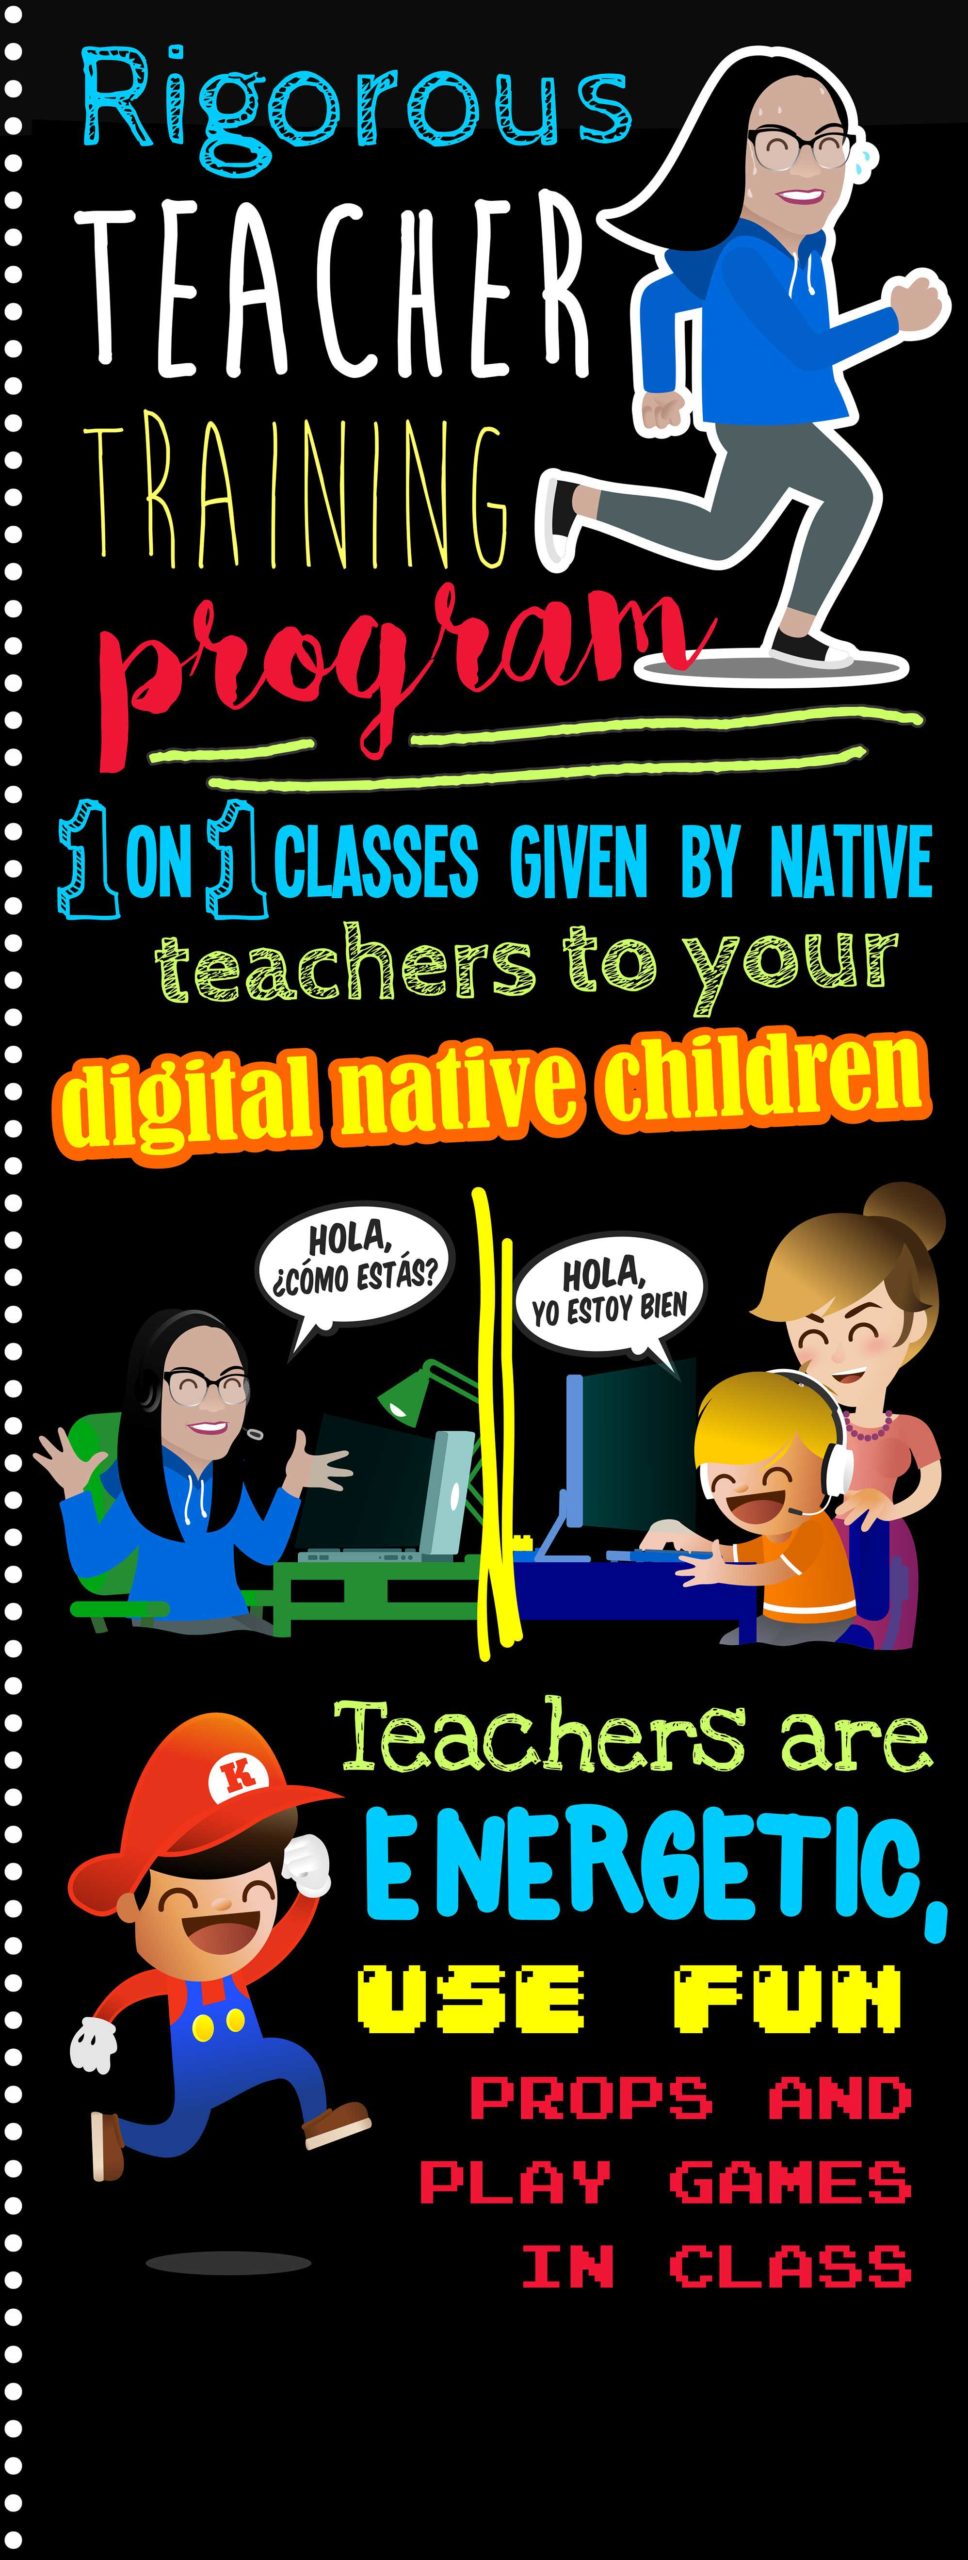 1 on 1 classes given by native teachers to your digital native children